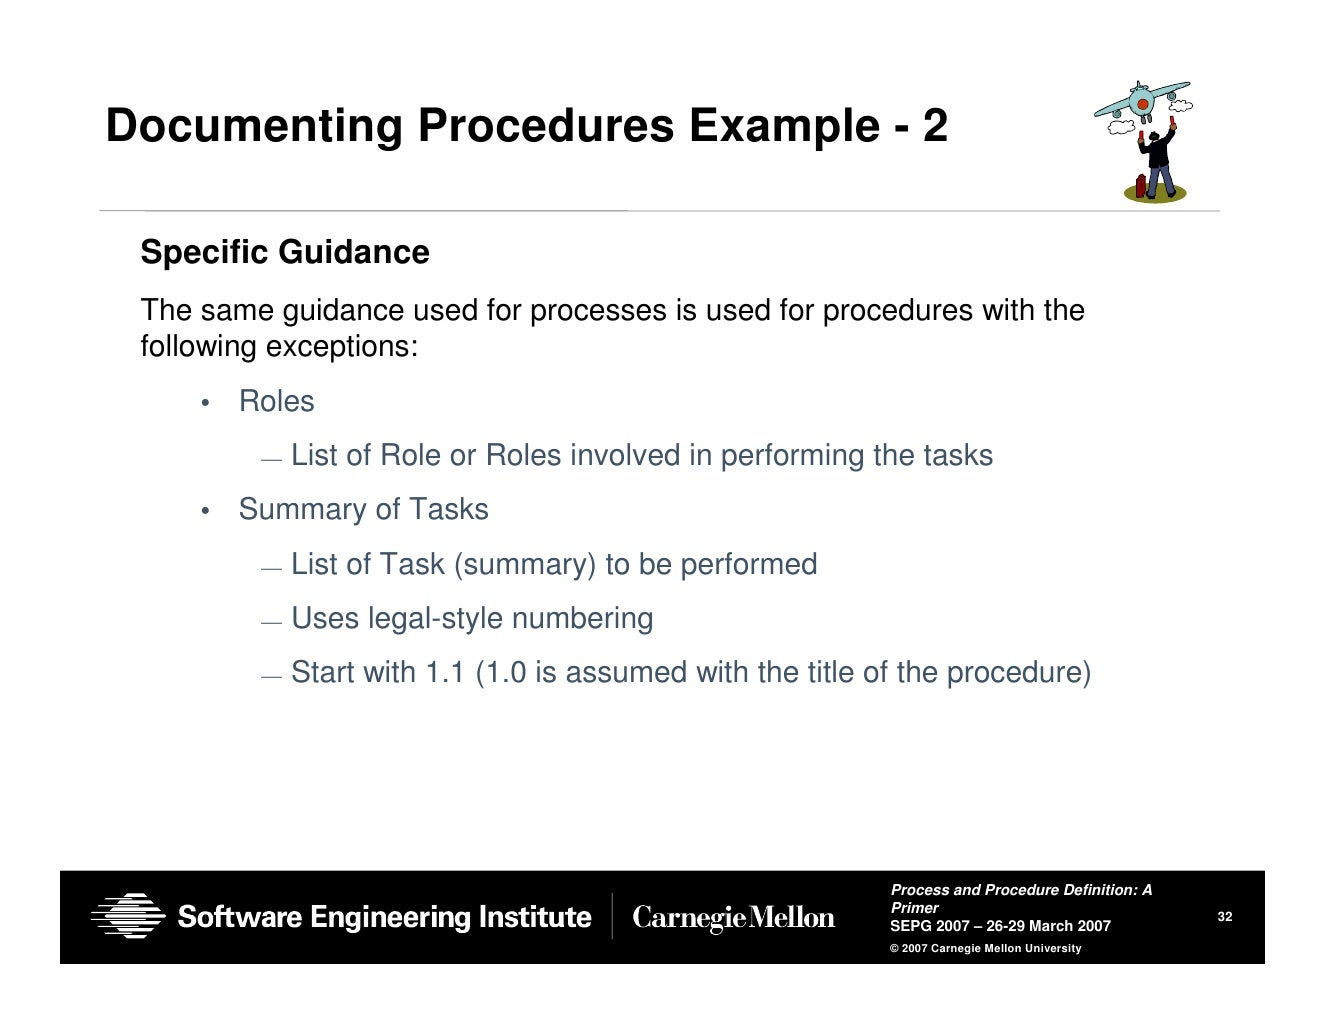 Processes and Procedures